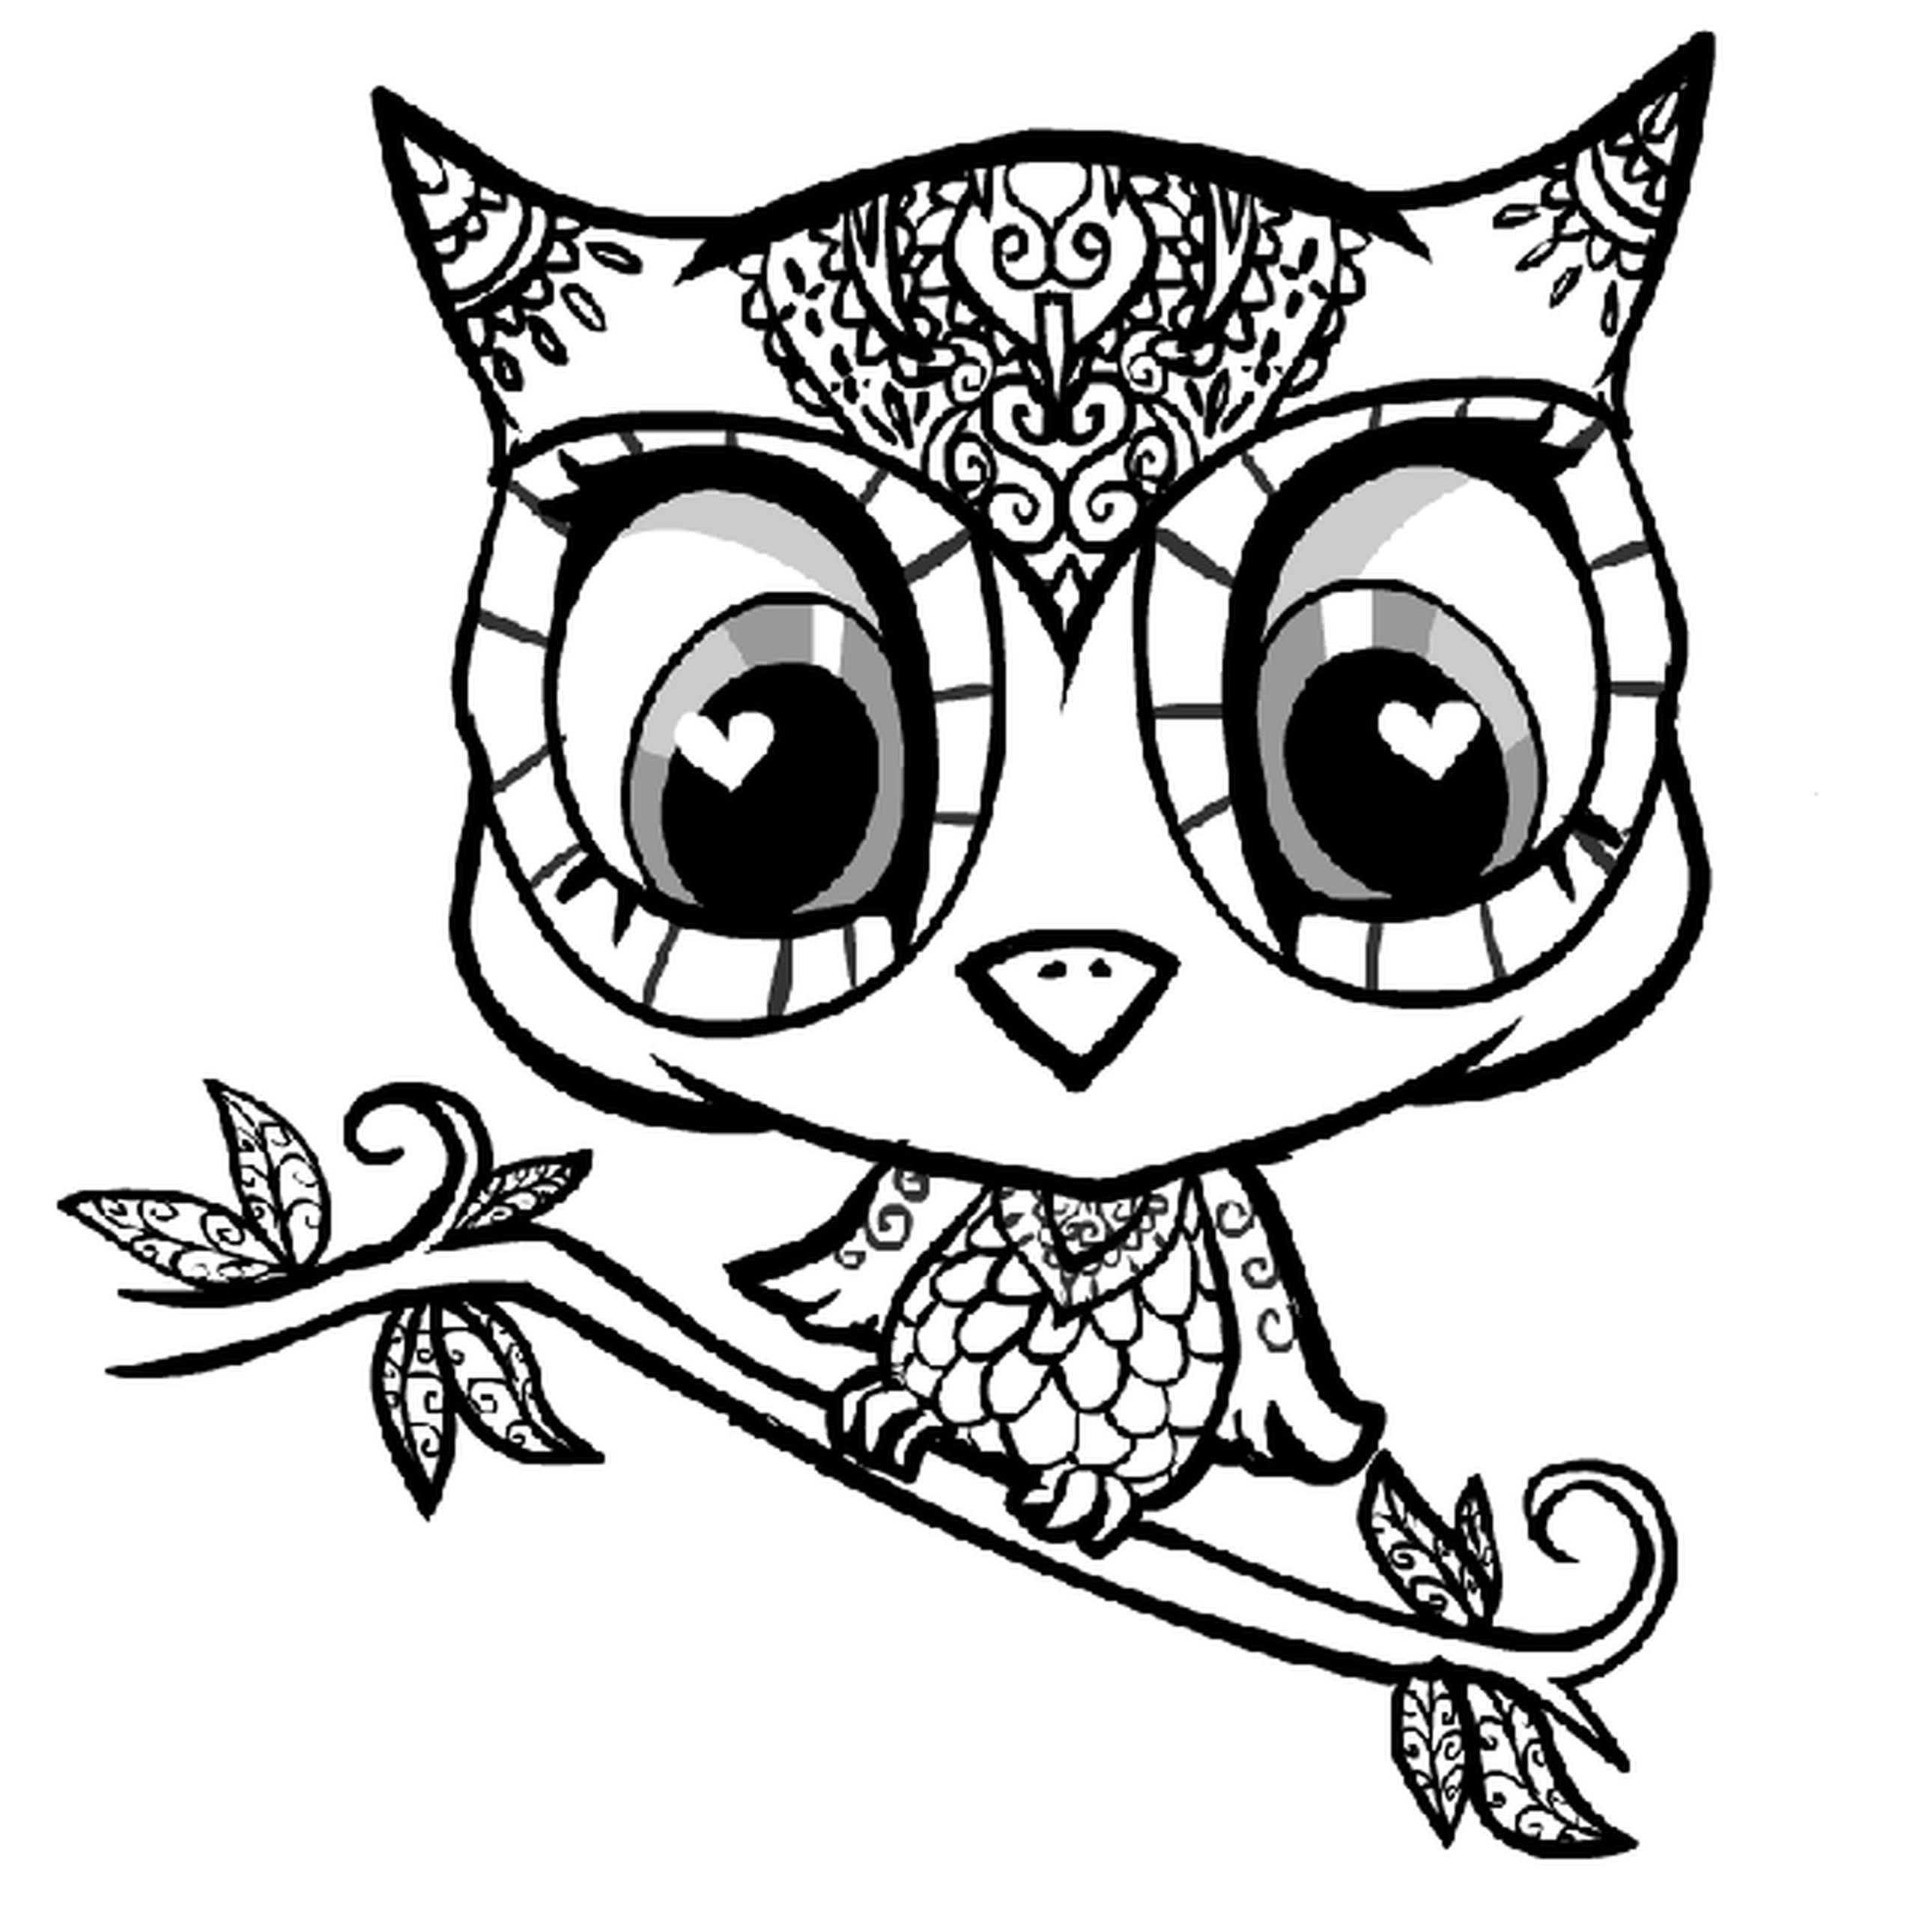 marvelous Owl Coloring Page - wonderful Coloring Pictures ...